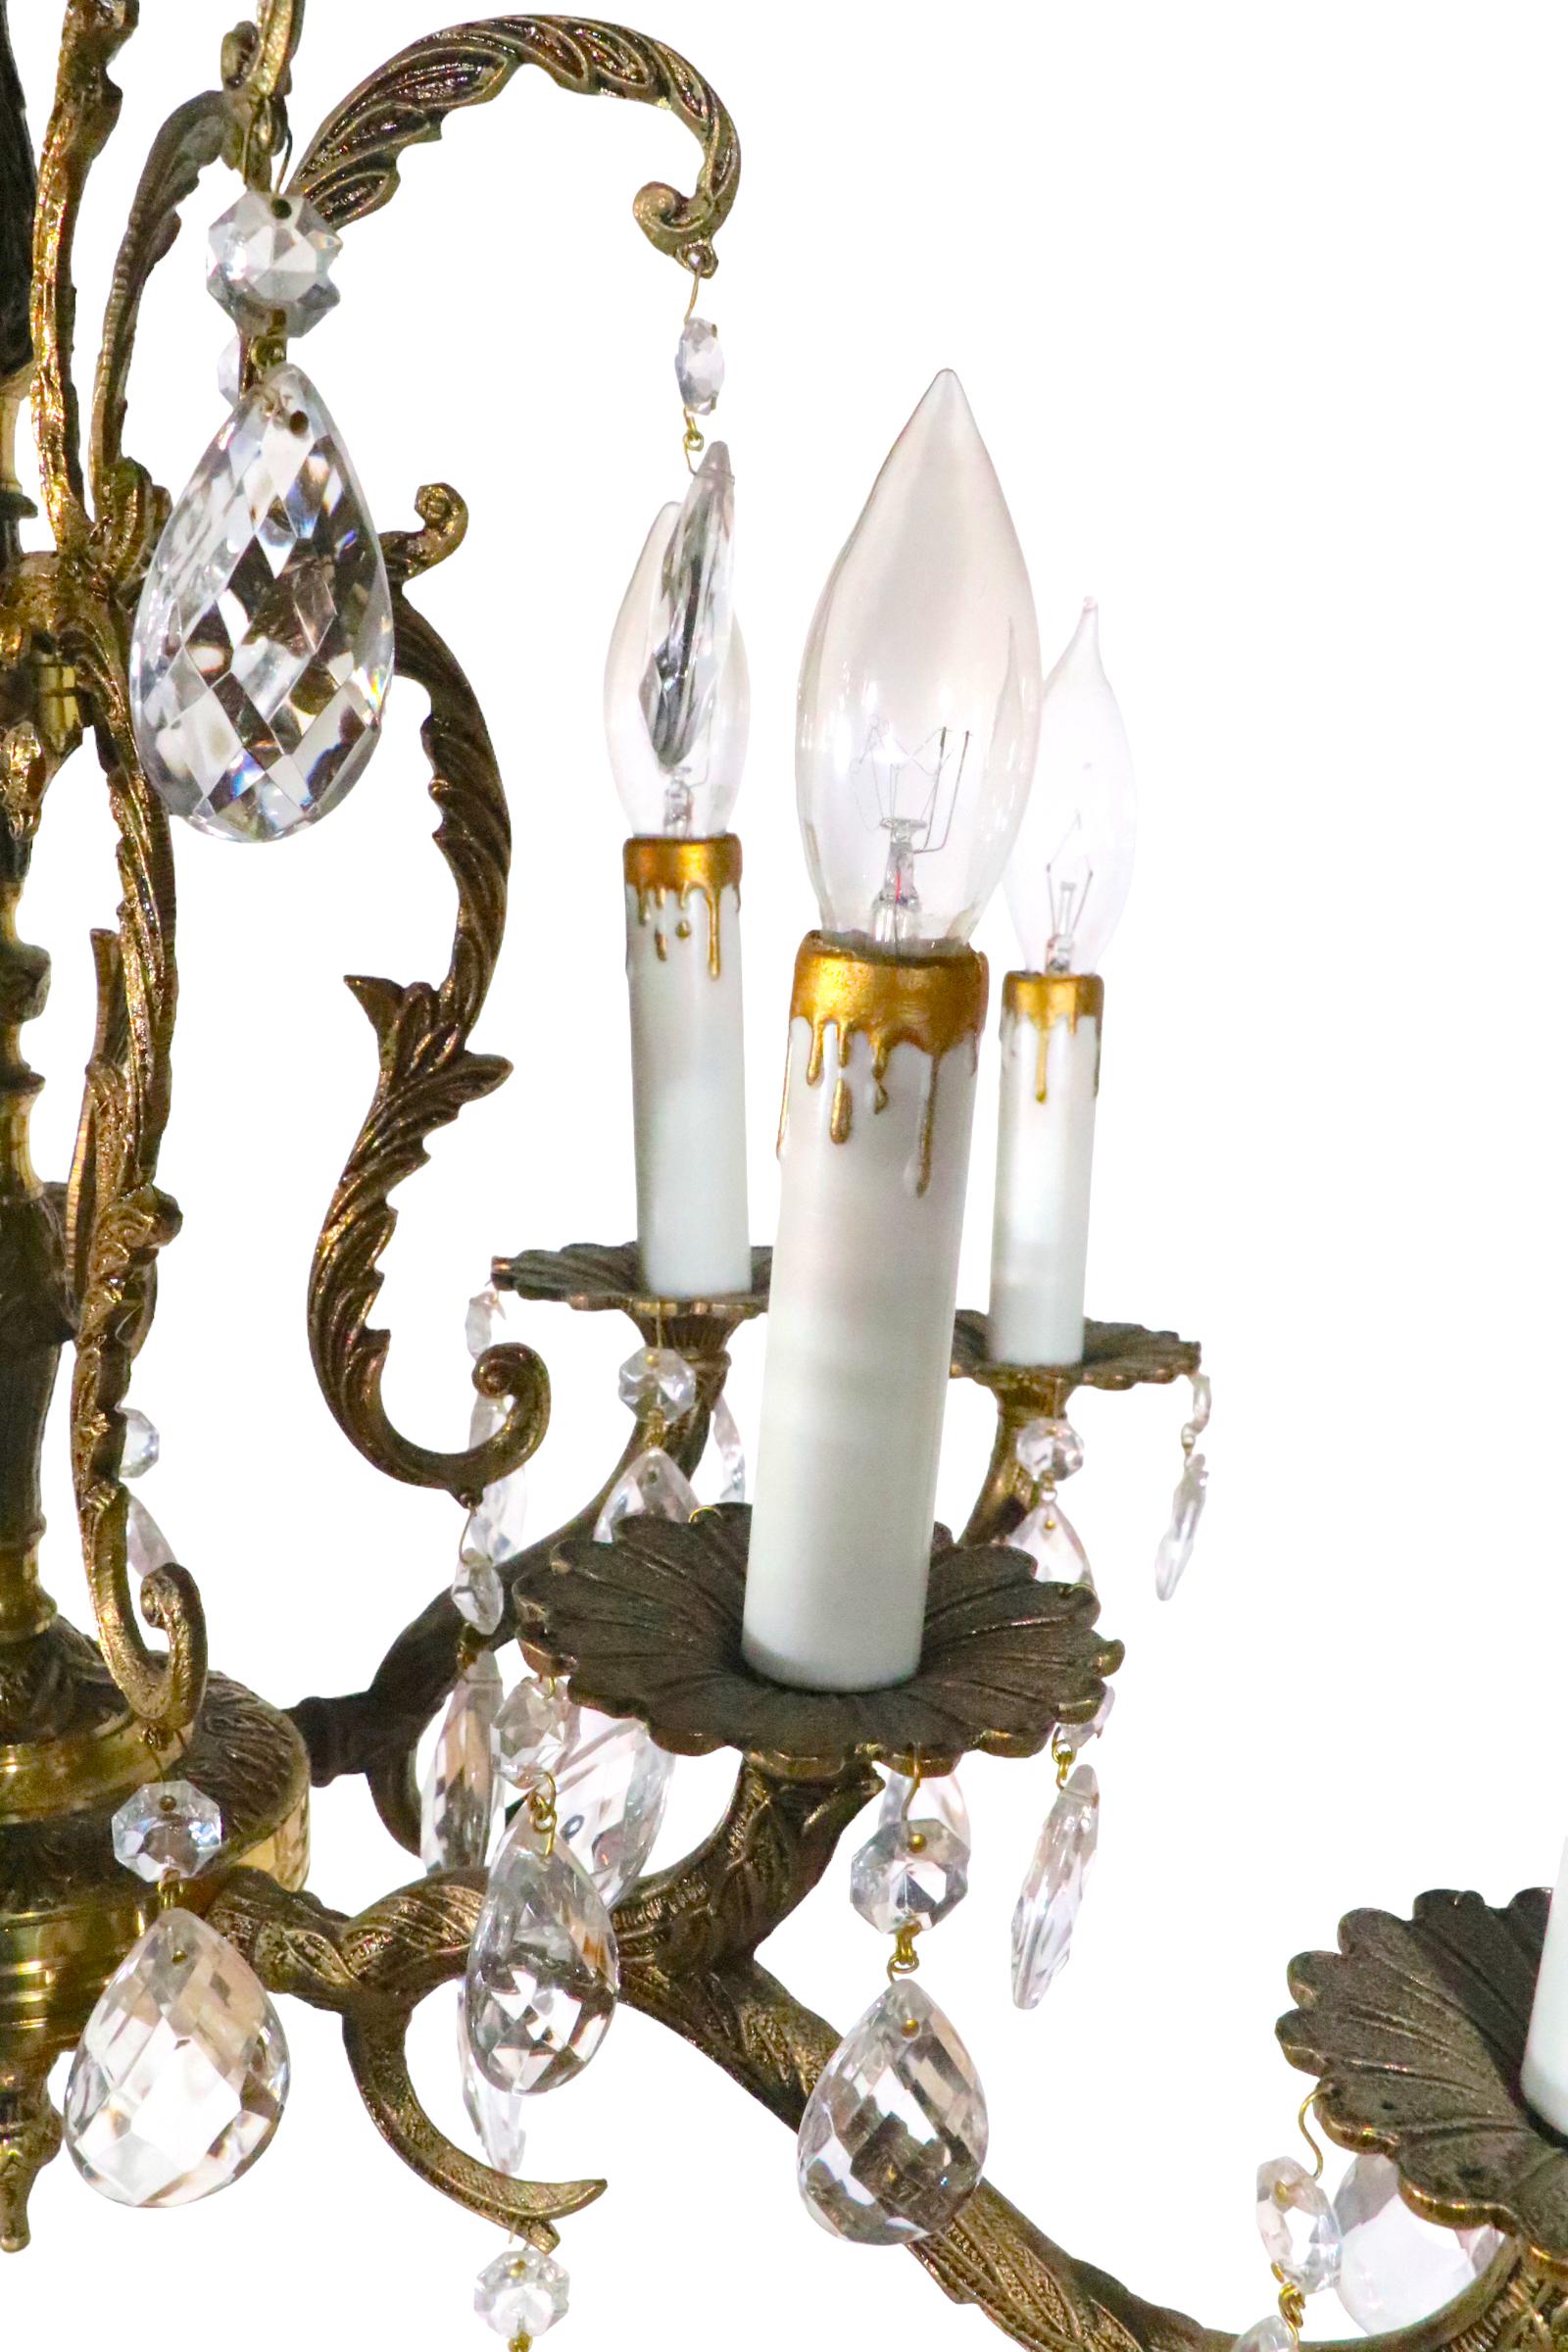 Exceptional 10 light chandelier, constructed of cast brass, dressed  with its original faceted glass crystals.  The chandelier features 10 candle bulbs, with an interior ring and a surrounding outer ring of lights. The fixture is in excellent,